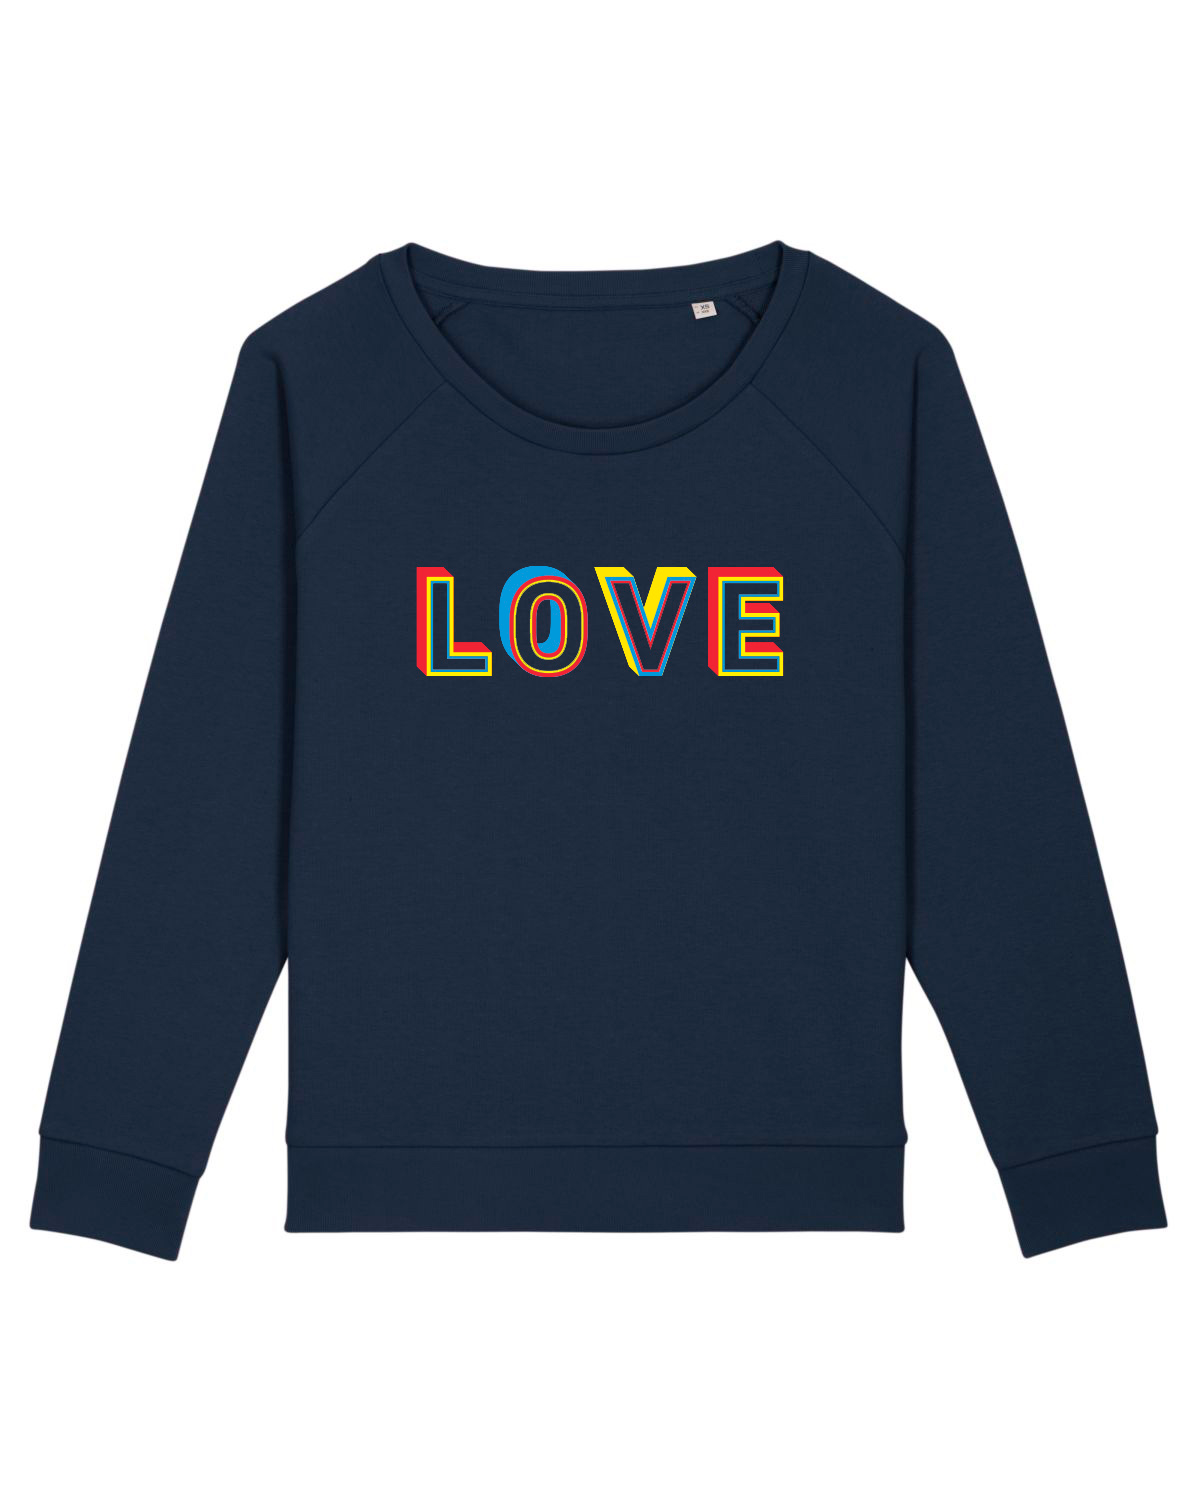 NEW Navy LOVE Sweatshirt - Relaxed Fit - MADE TO ORDER